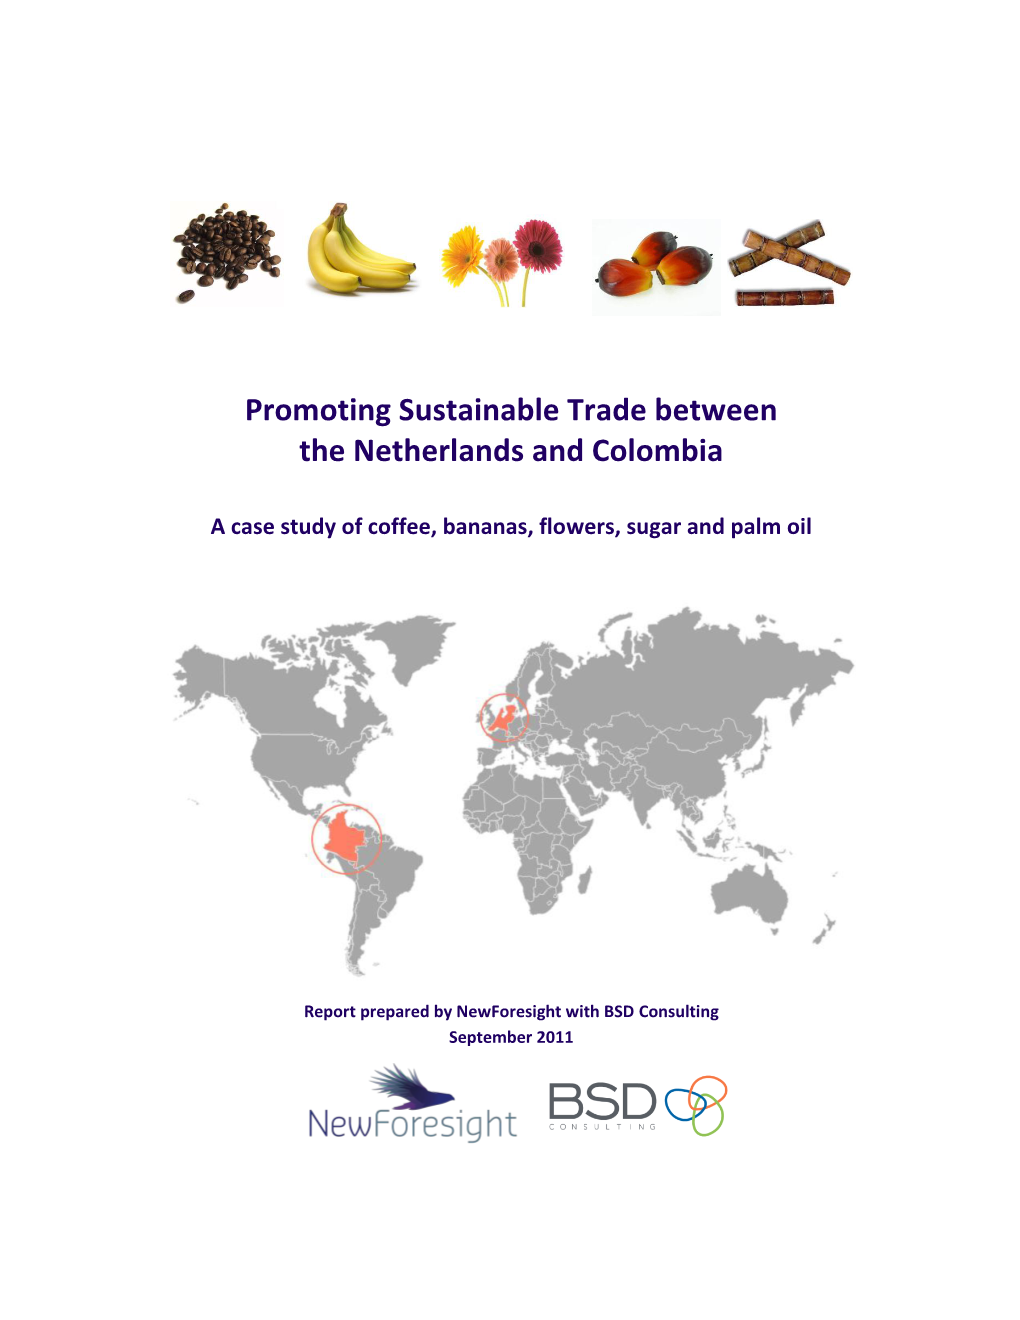 Promoting Sustainable Trade Between the Netherlands and Colombia